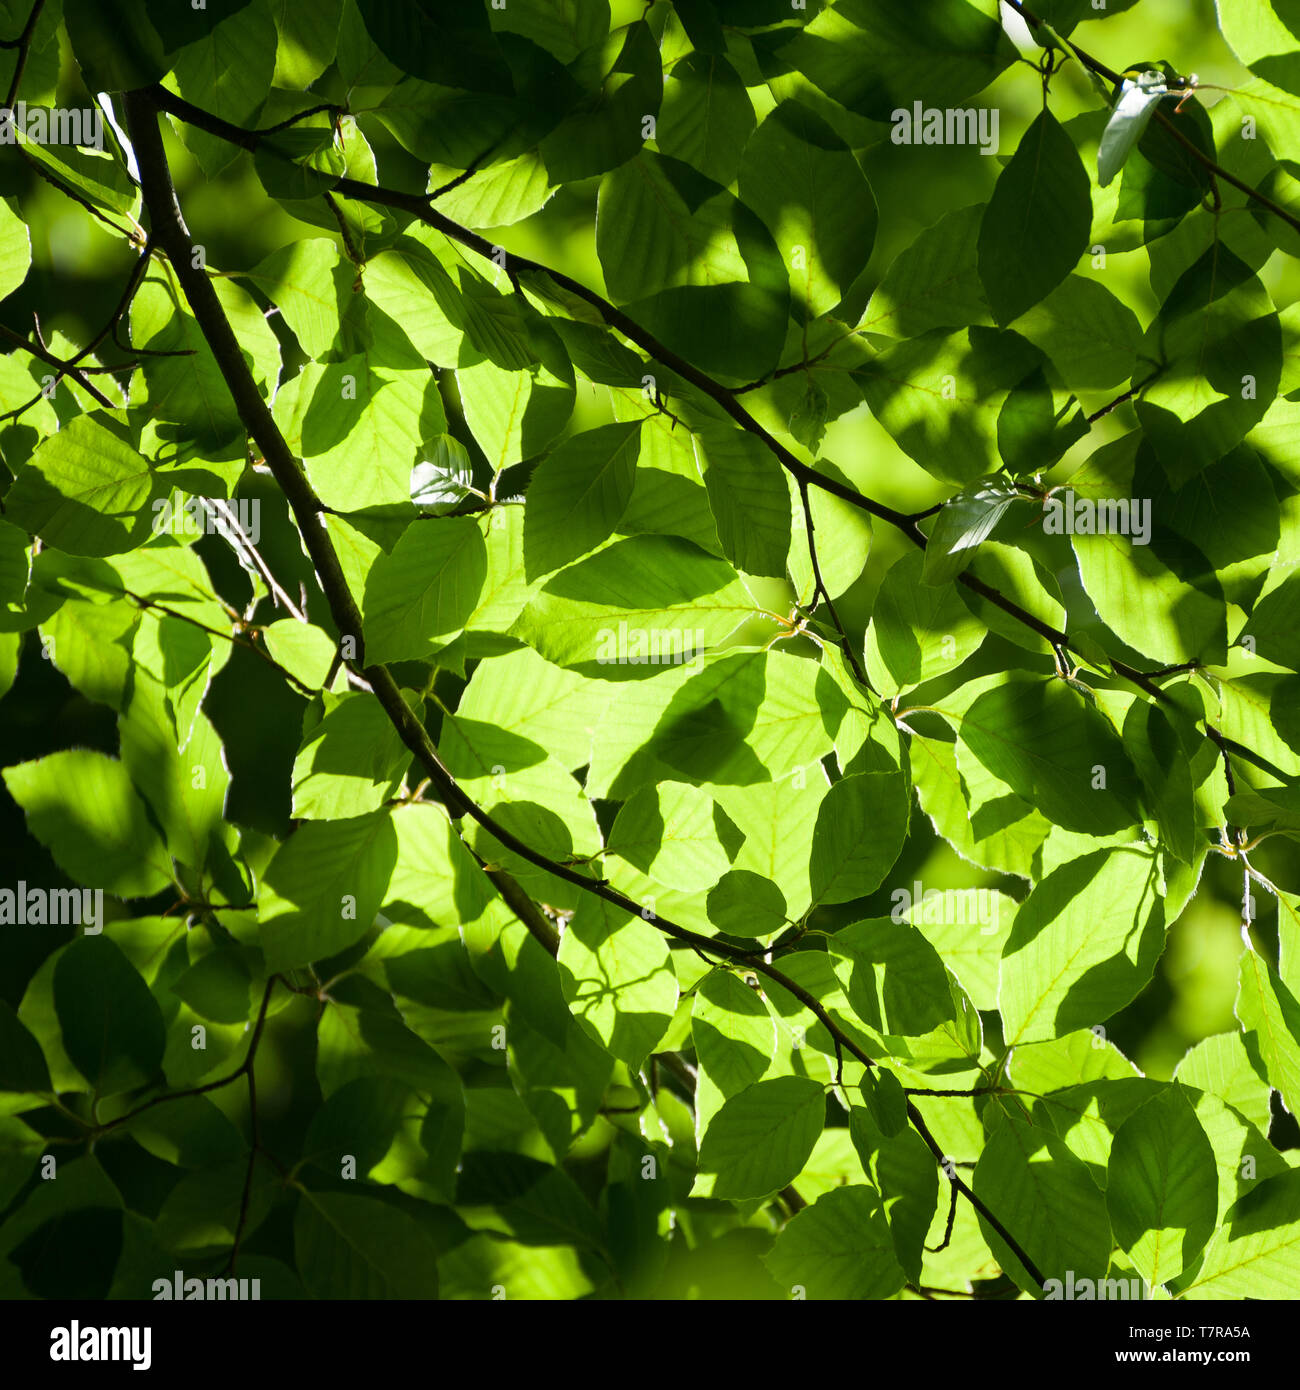 Square green foliage background. Linden tree branches in summer forest. Stock Photo